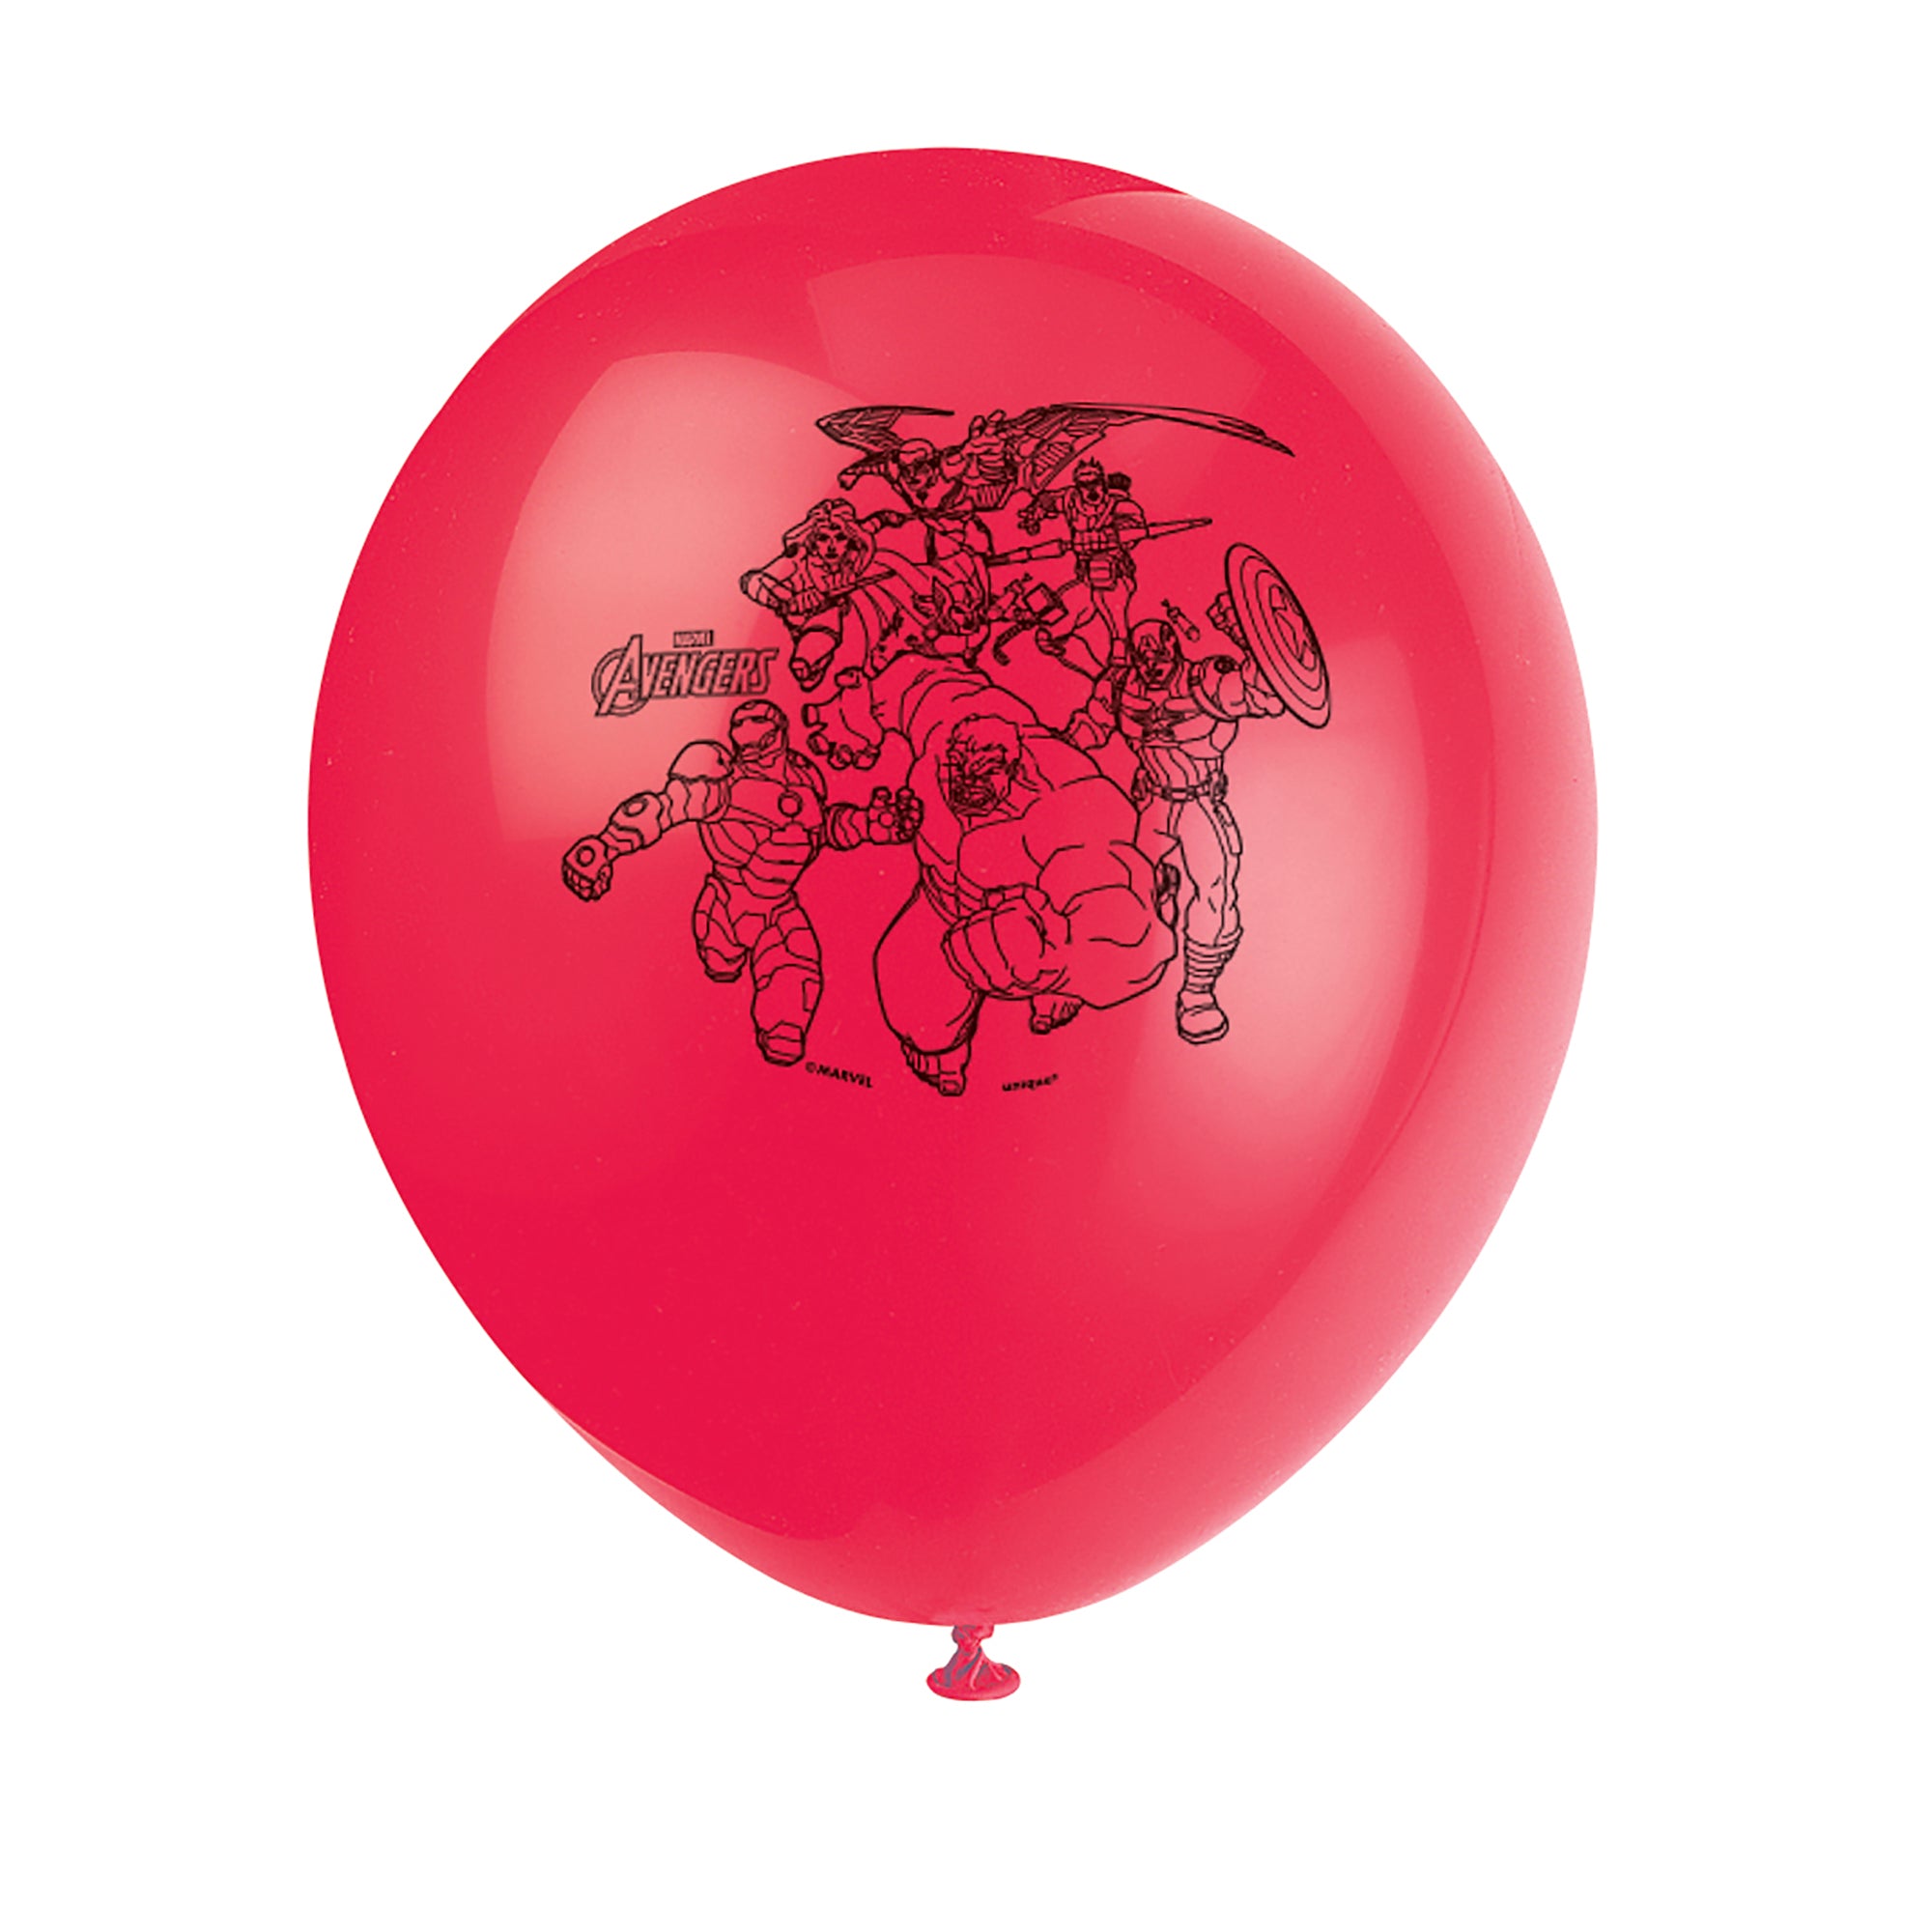 Avengers 8 Printed Latex Balloons 12in Assorted Colors